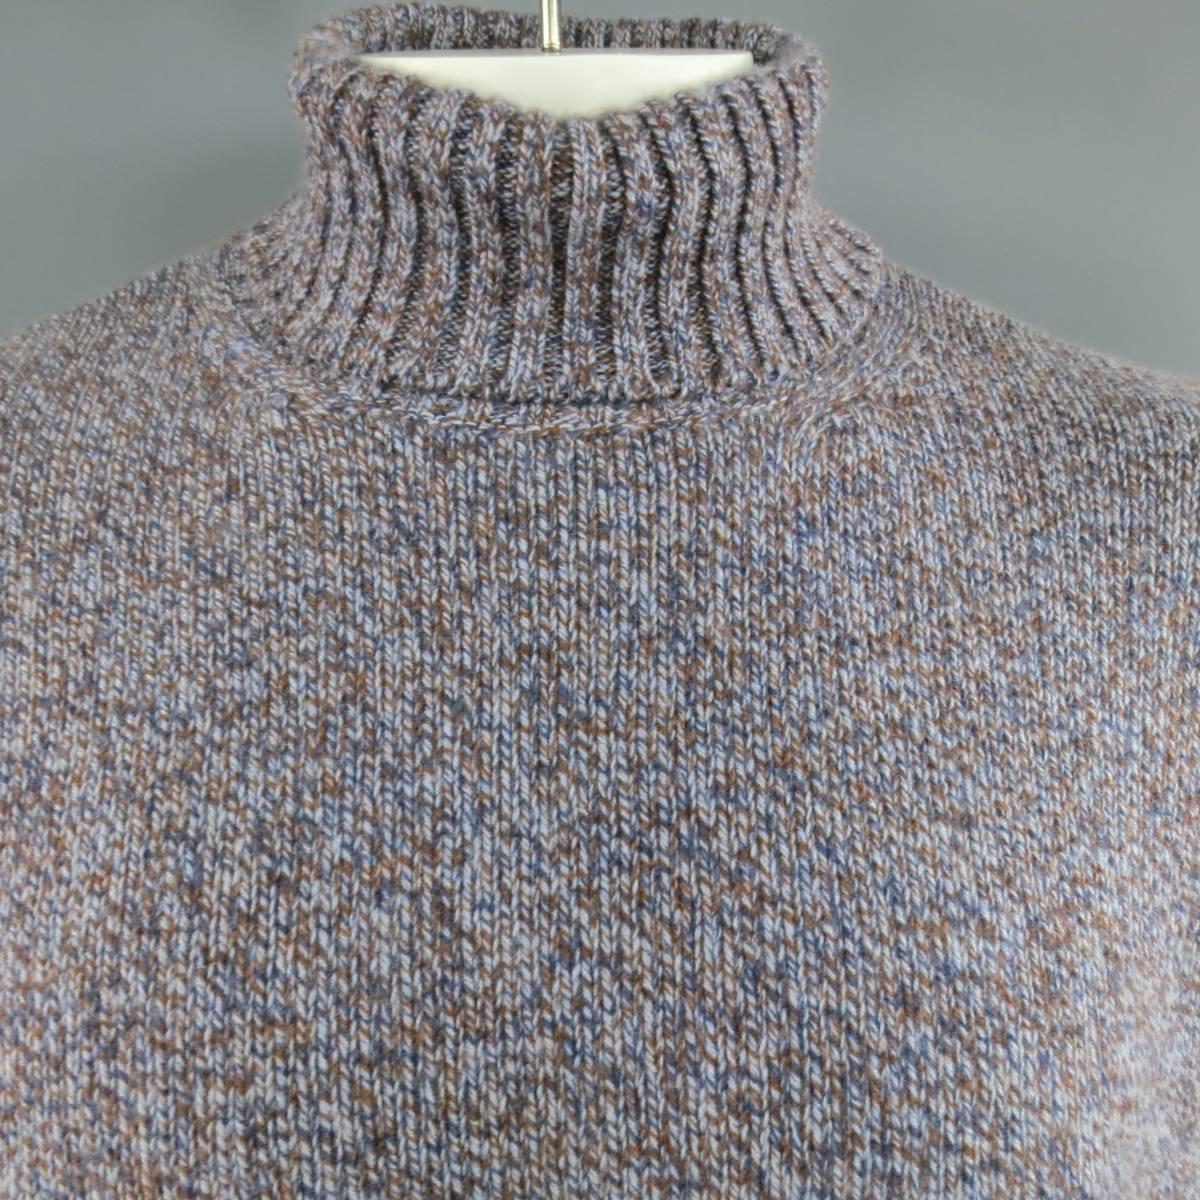 LORO PIANA Sweater consists of 100% cashmere material in a blue and brown color tone. Designed in a turtle-neck style, heather knit pattern throughout body. Detailed with rib cuff's and hem. Made in Italy.
 
Excellent Pre-Owned Condition
Marked